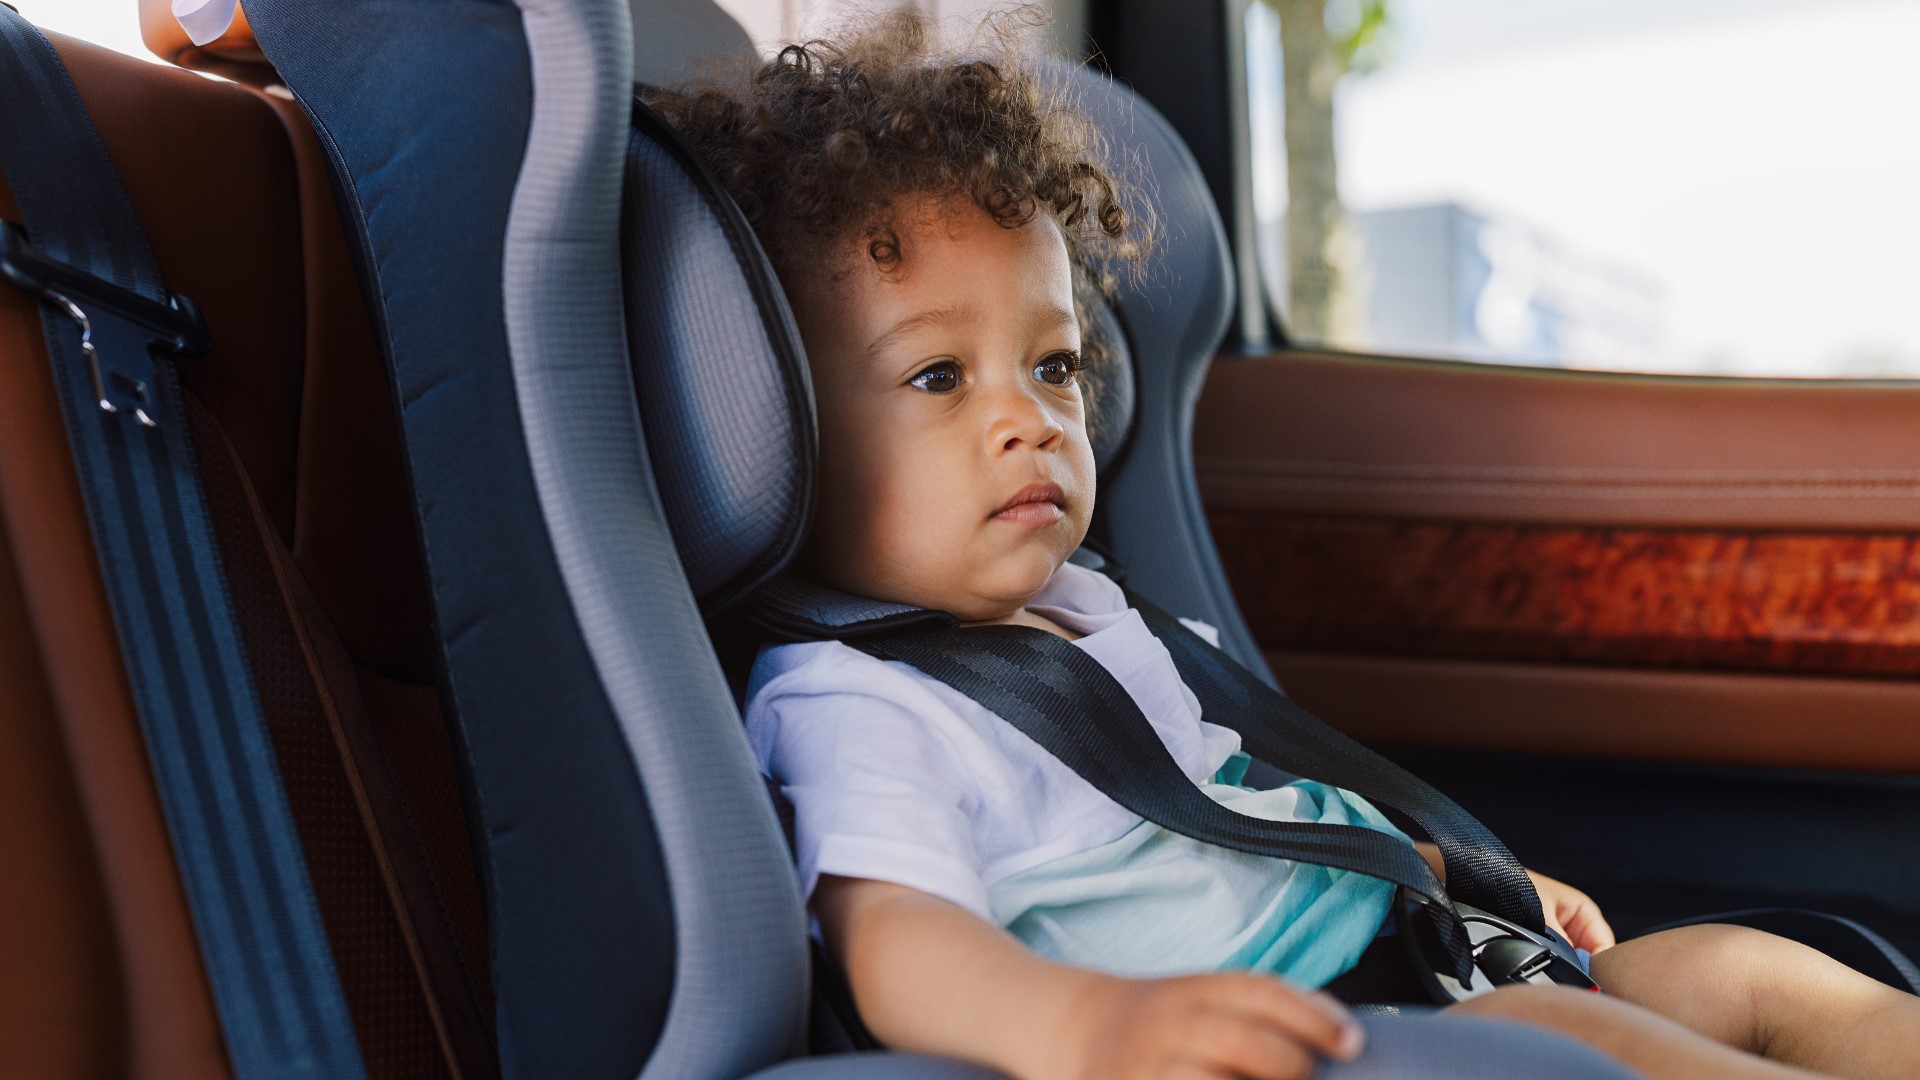 On average, every 10 days, a child dies from heatstroke in a vehicle, according to the National Highway Traffic Safety Administration.